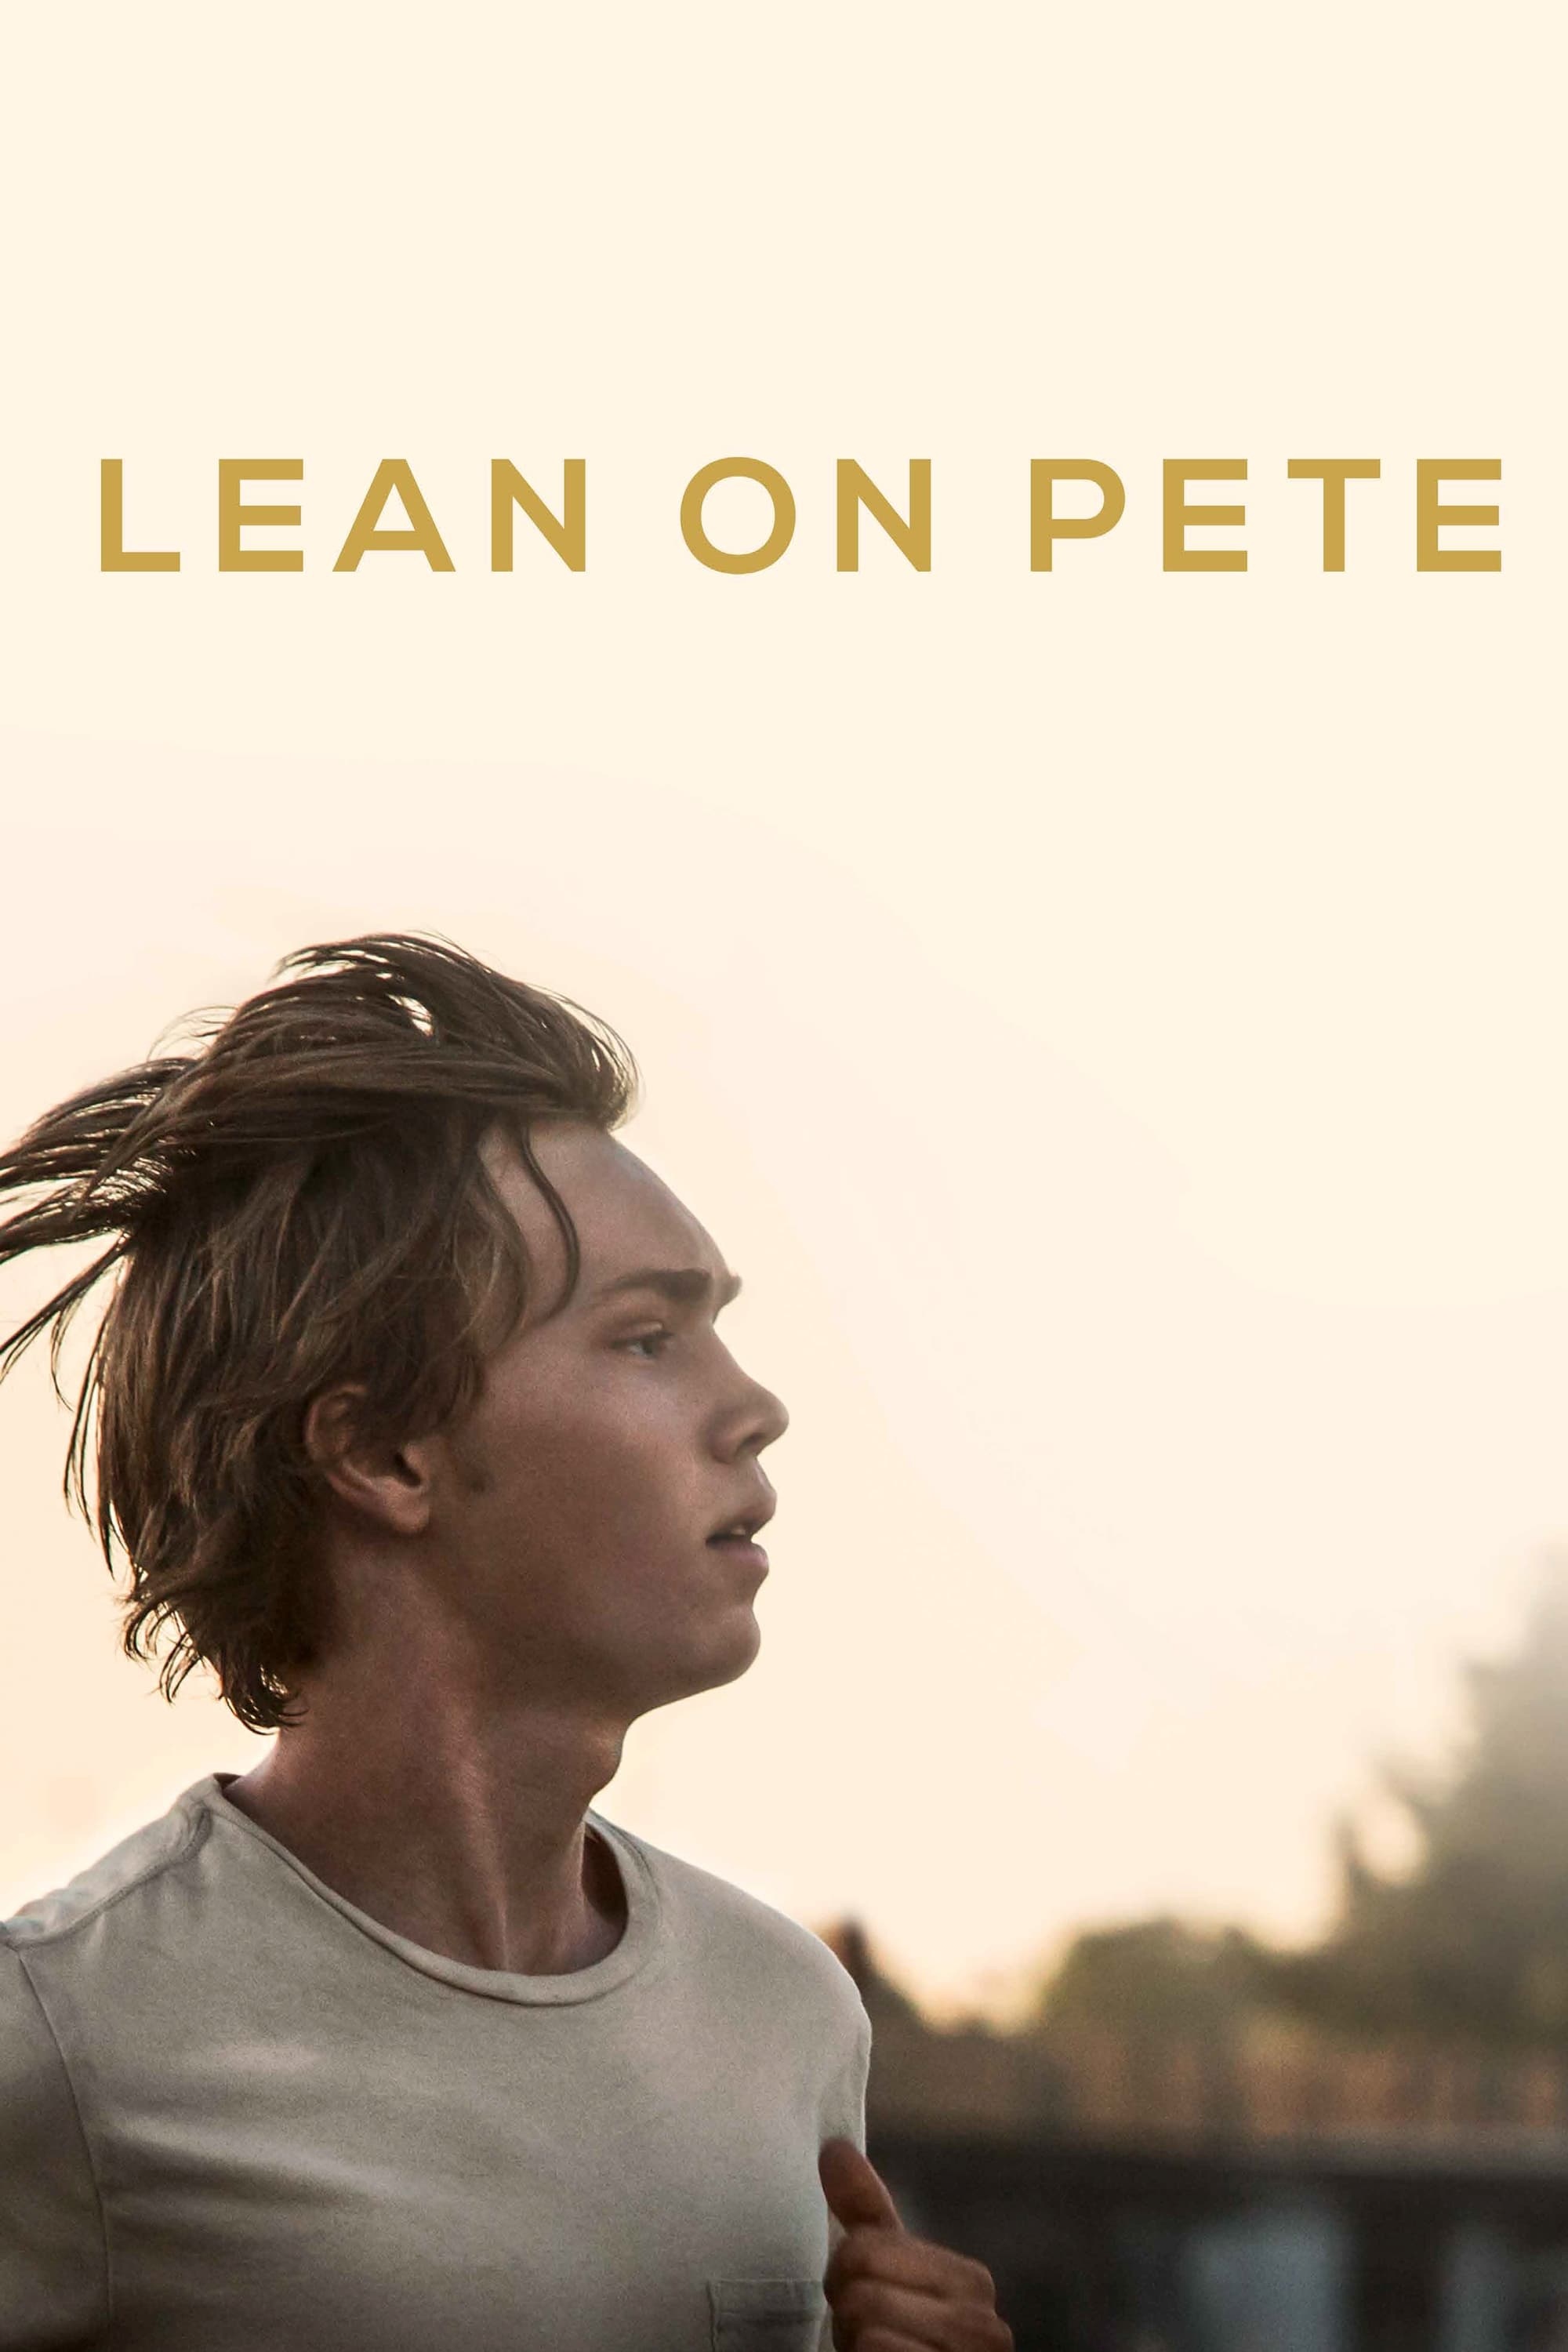 Lean on Pete movie, Posters collection, The Movie Database (TMDB), Visual inspiration, 2000x3000 HD Handy